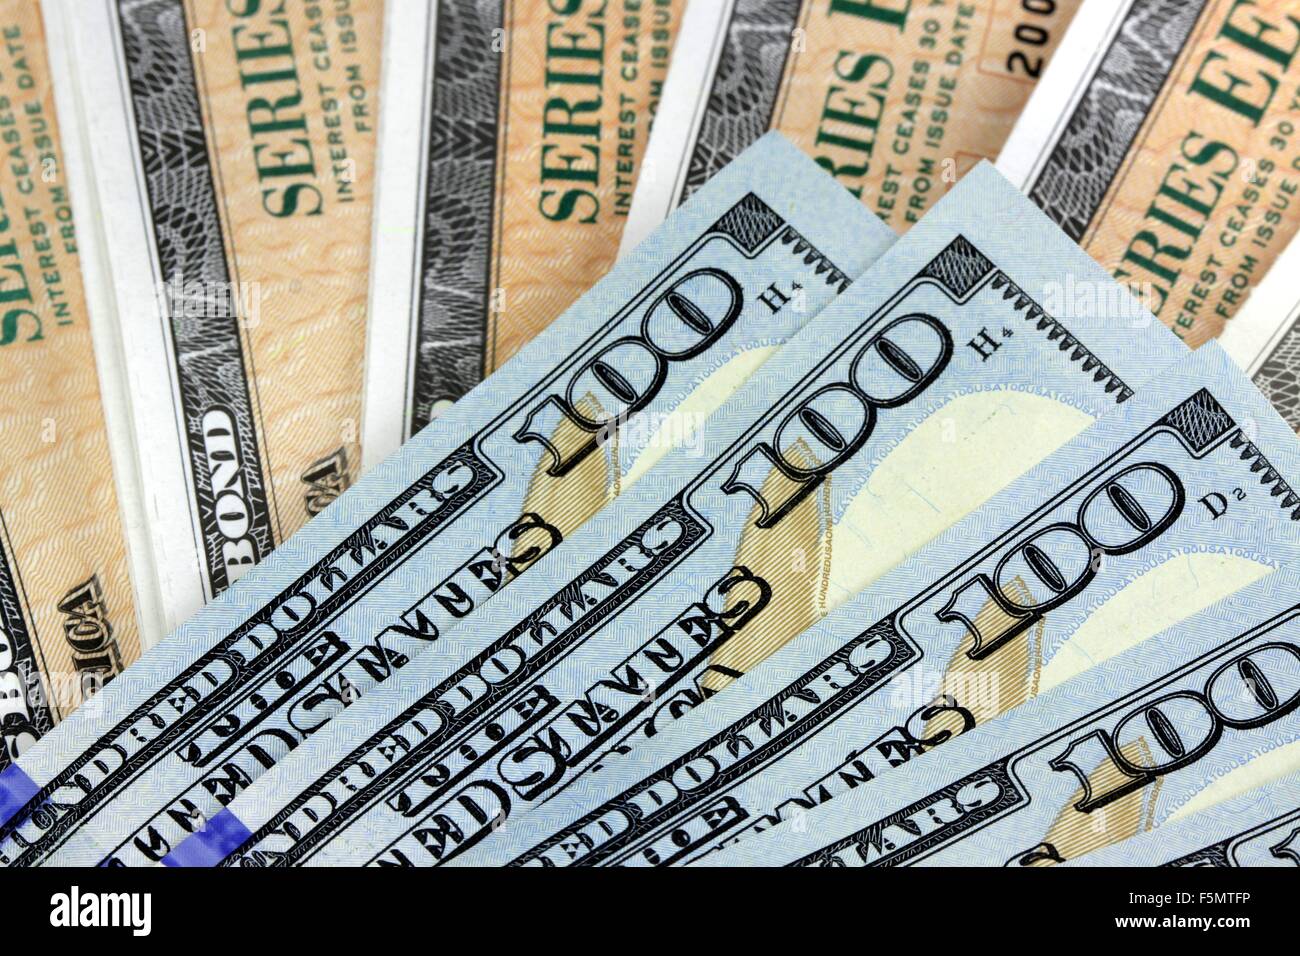 United States Savings Bonds with American Currency - Financial Security Stock Photo